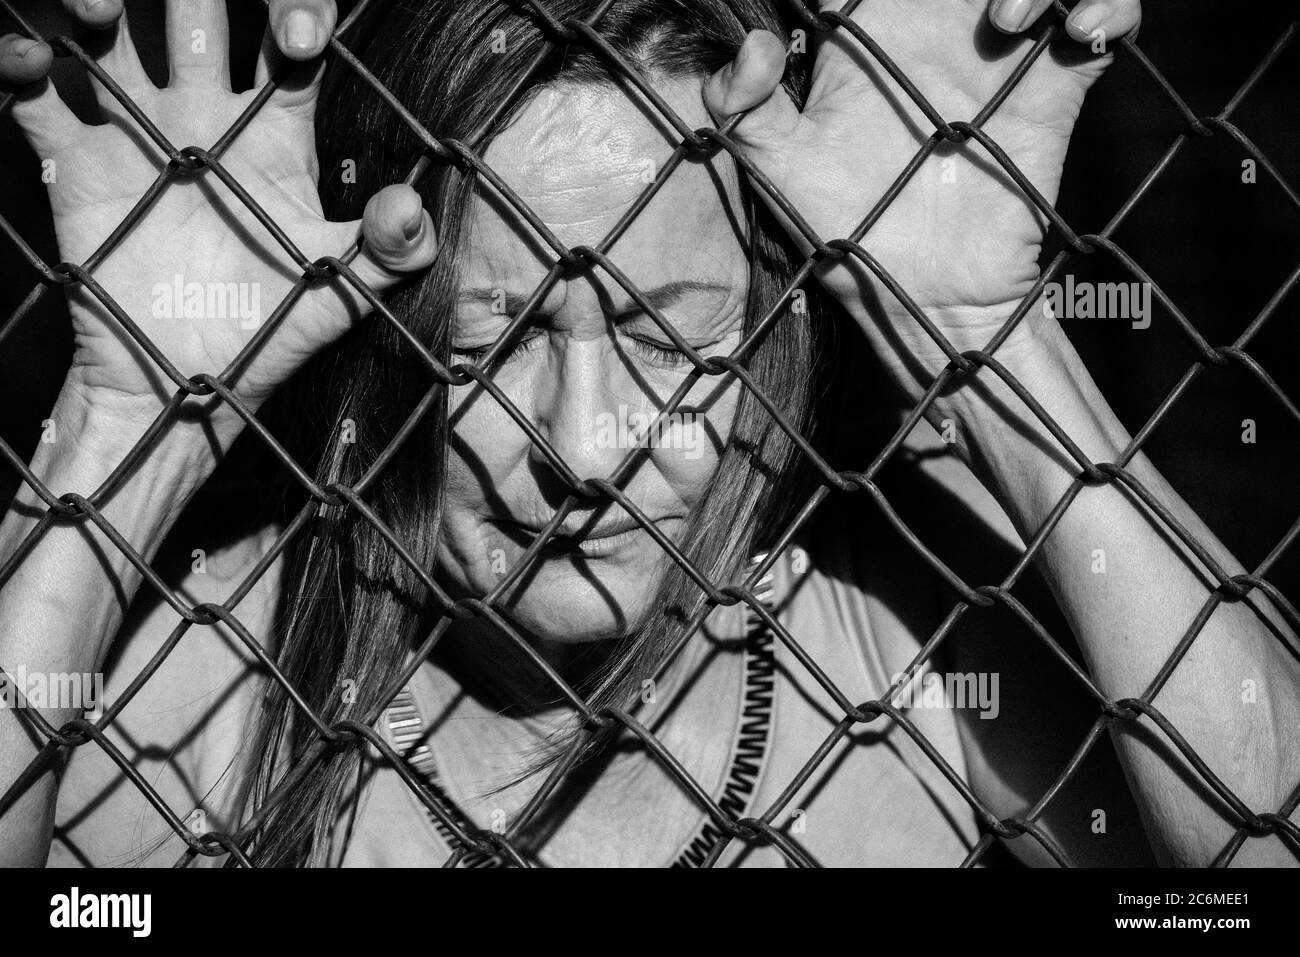 Filtered image Portrait of devastated, stressed mature woman with closed eyes and hands gripped on behind mesh wire fence Stock Photo